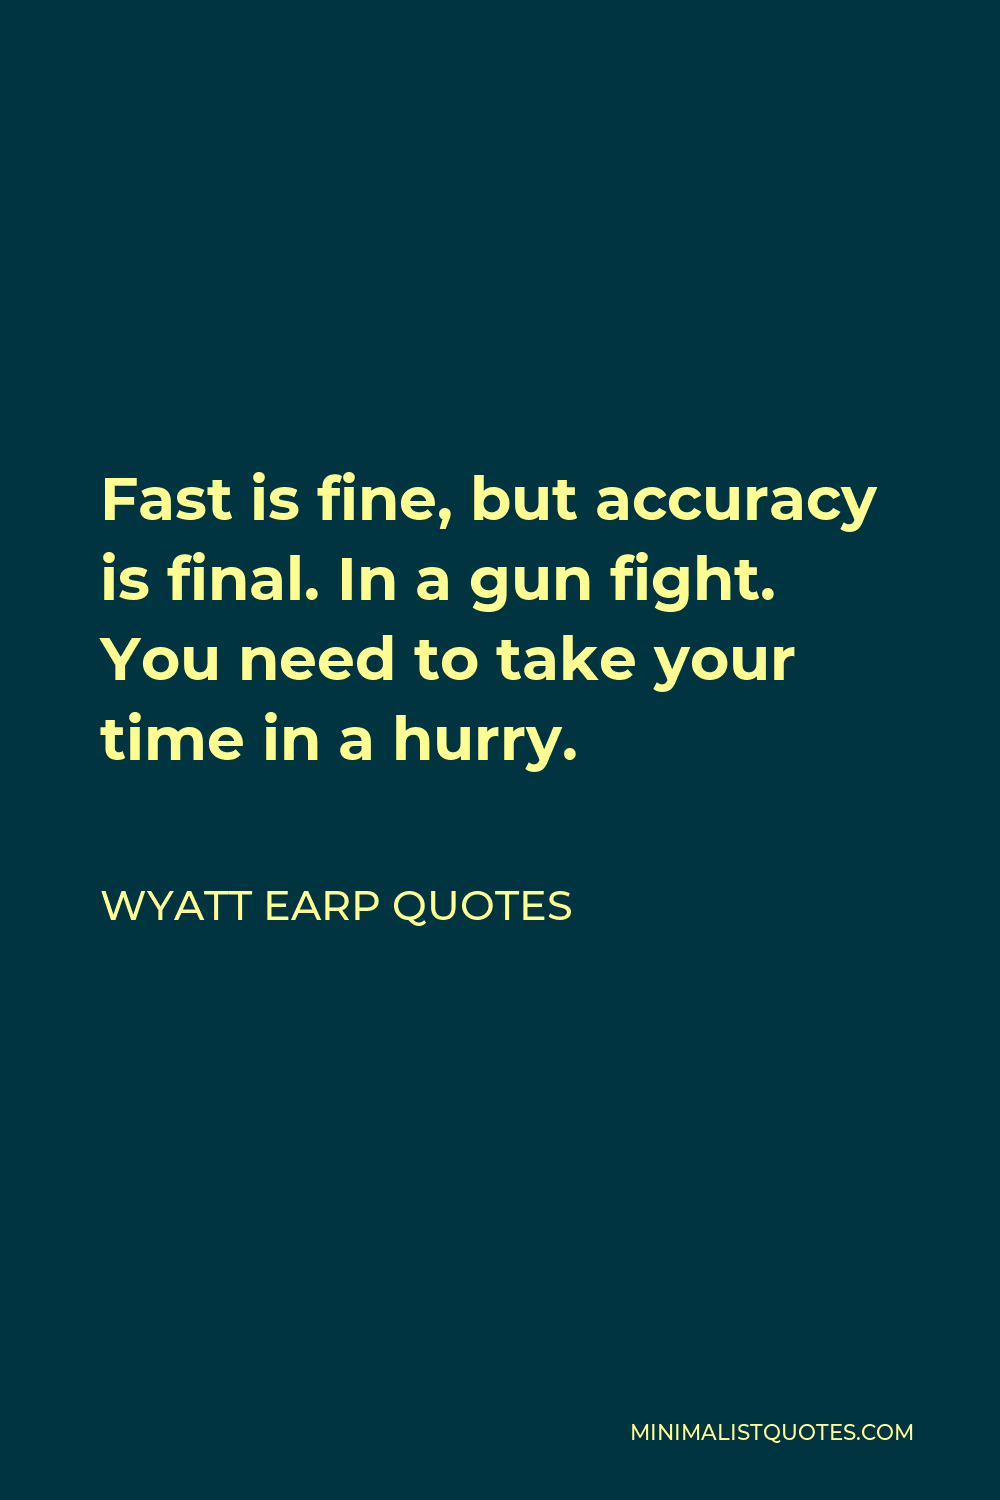 Wyatt Earp Quotes Quote - Fast is fine, but accuracy is final. In a gun fight. You need to take your time in a hurry.